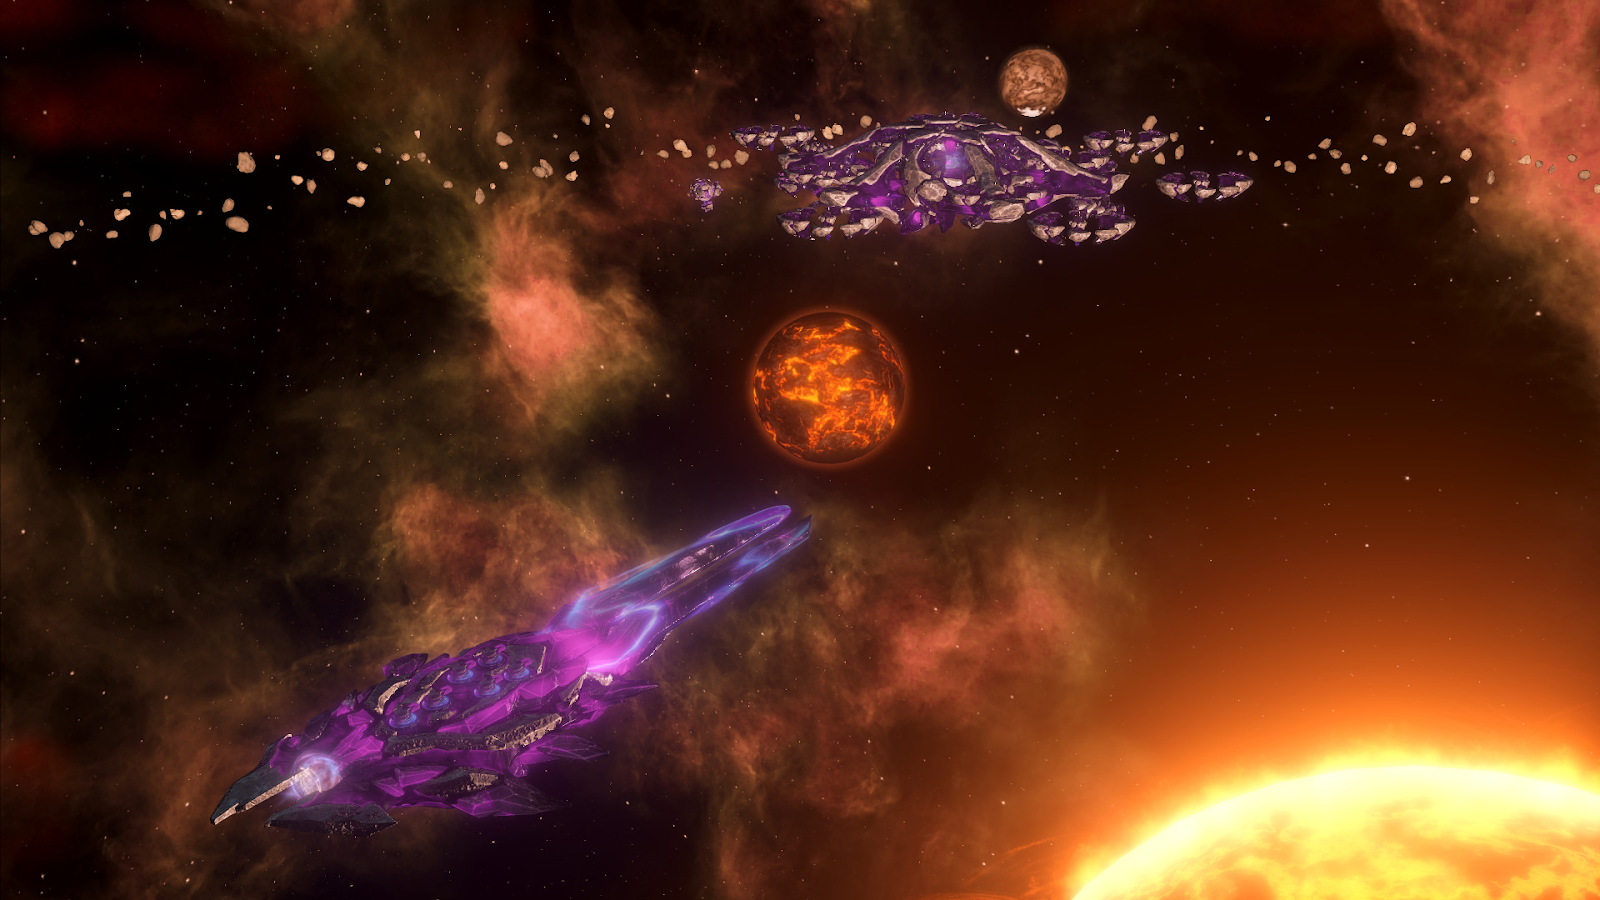 Paradox Announces Stellaris: Galaxy Command for iOS and Android